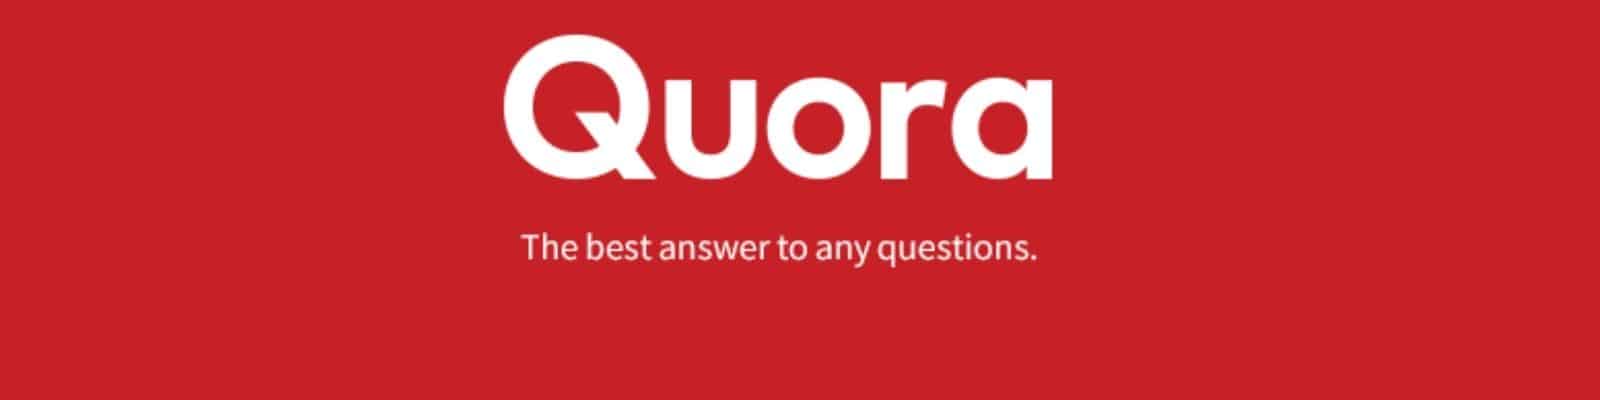 How to Use Quora for Marketing any Business (top 6 strategies)